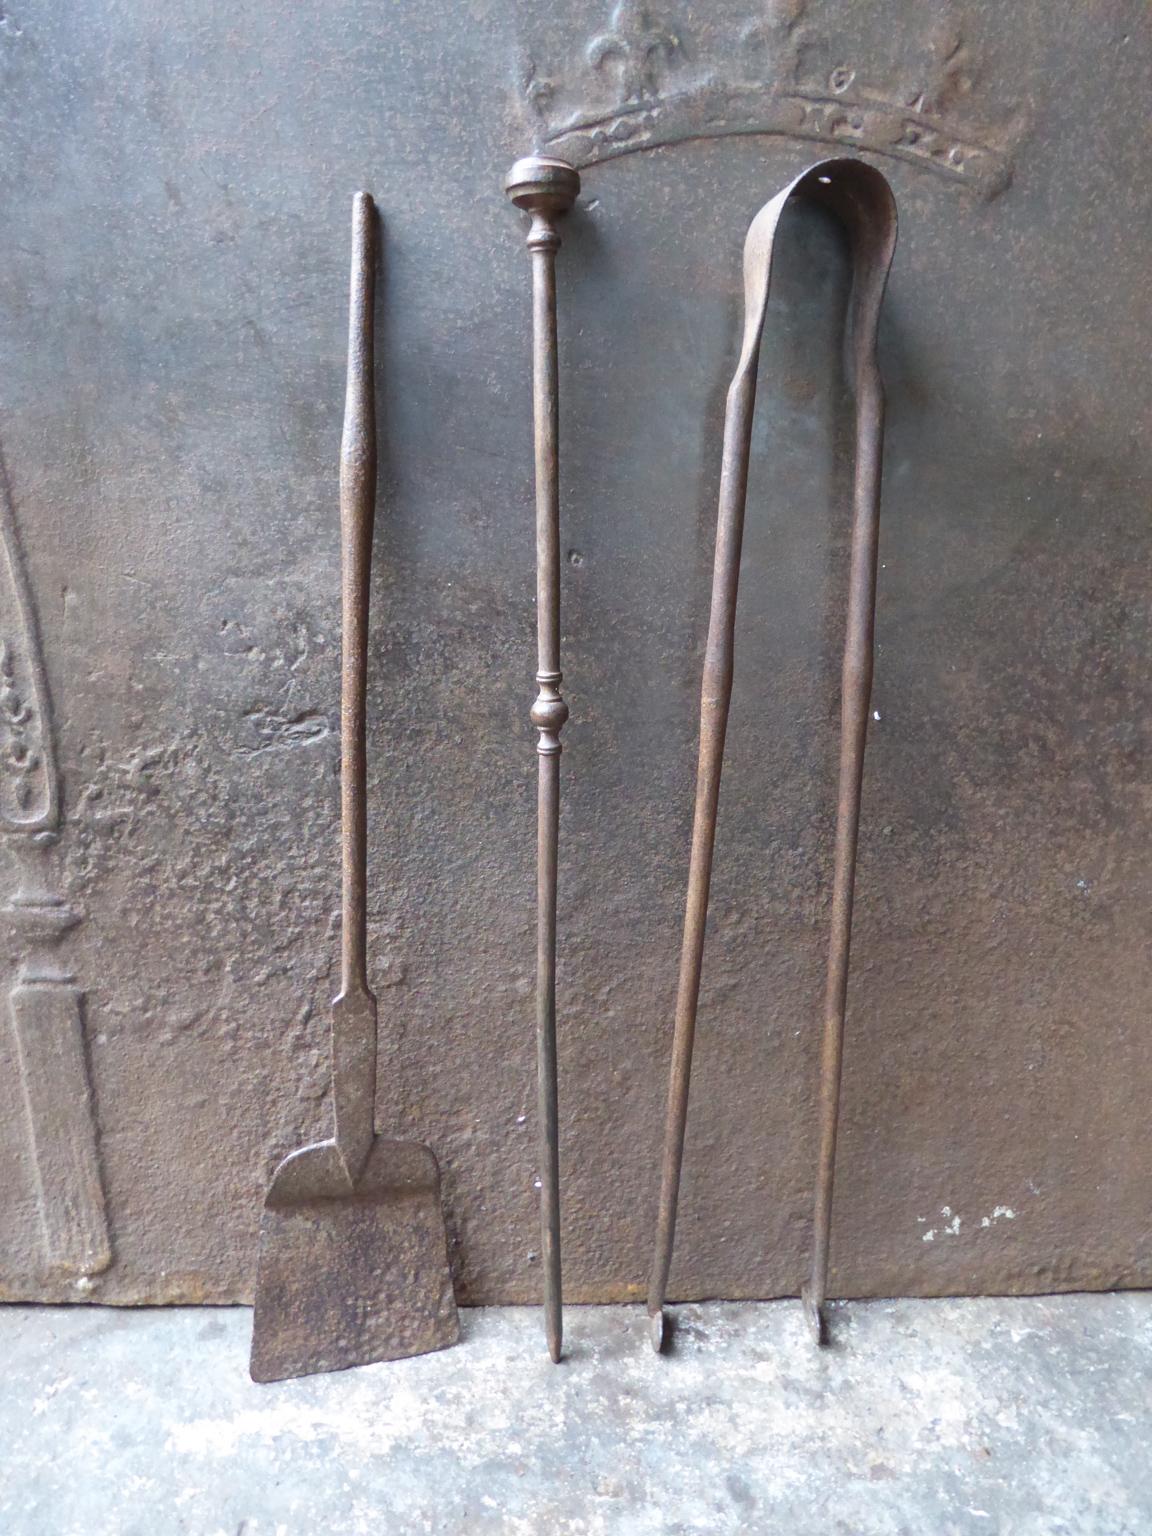 18th century French Louis XV fireplace tool set consisting of fireplace tongs, a poker and a shovel. The fire irons are made of wrought iron. They are in a good condition and are fully functional.